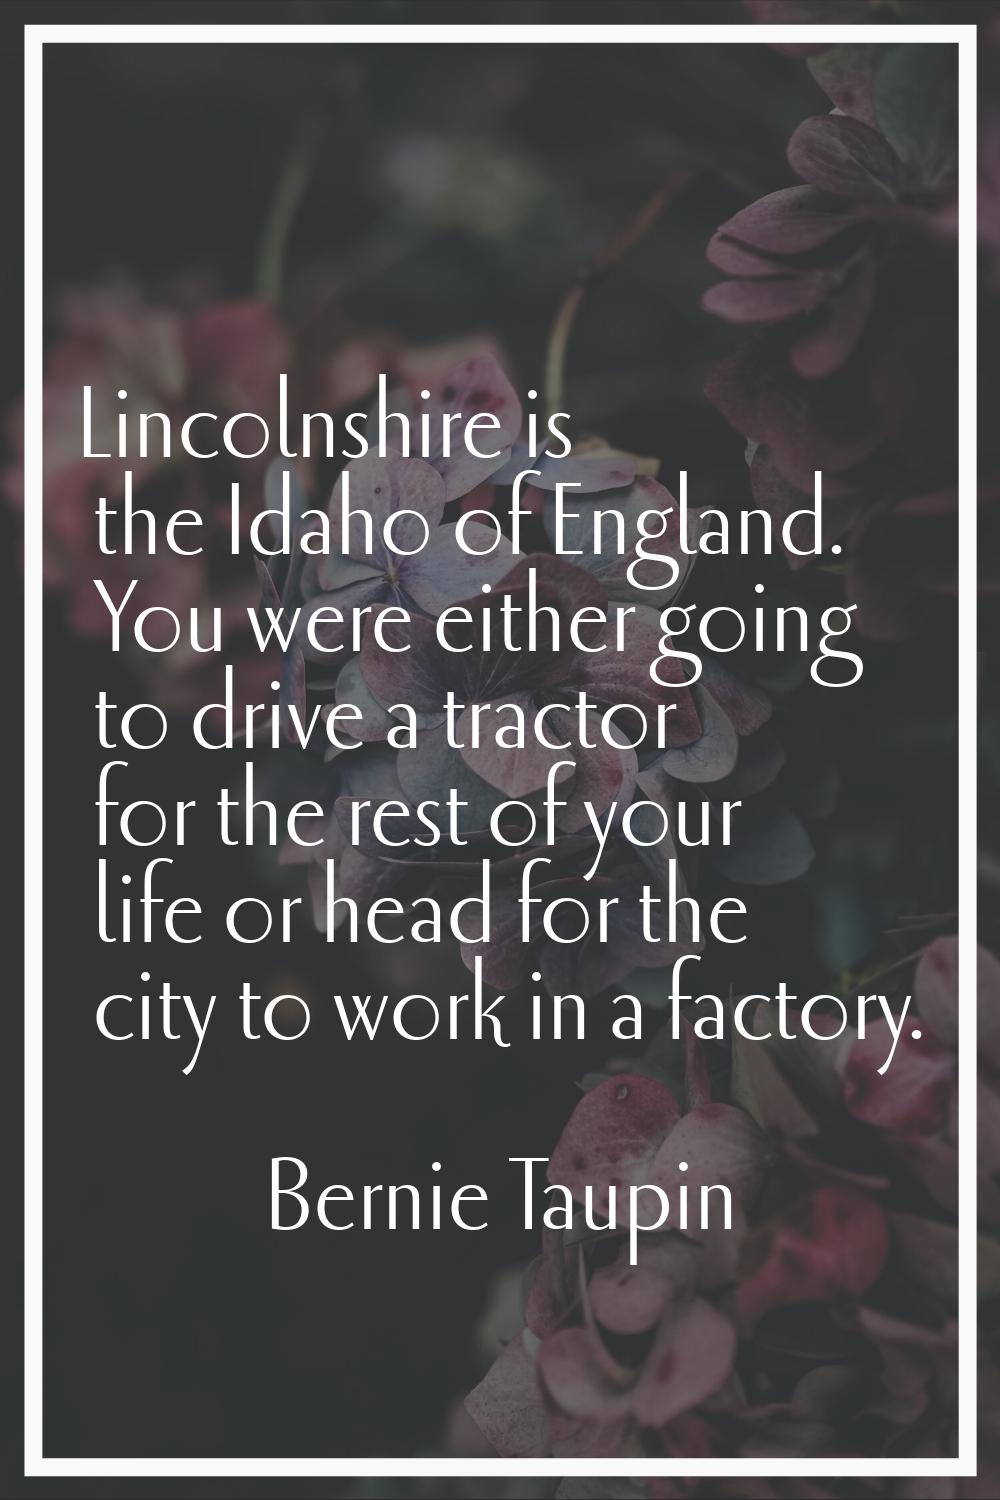 Lincolnshire is the Idaho of England. You were either going to drive a tractor for the rest of your